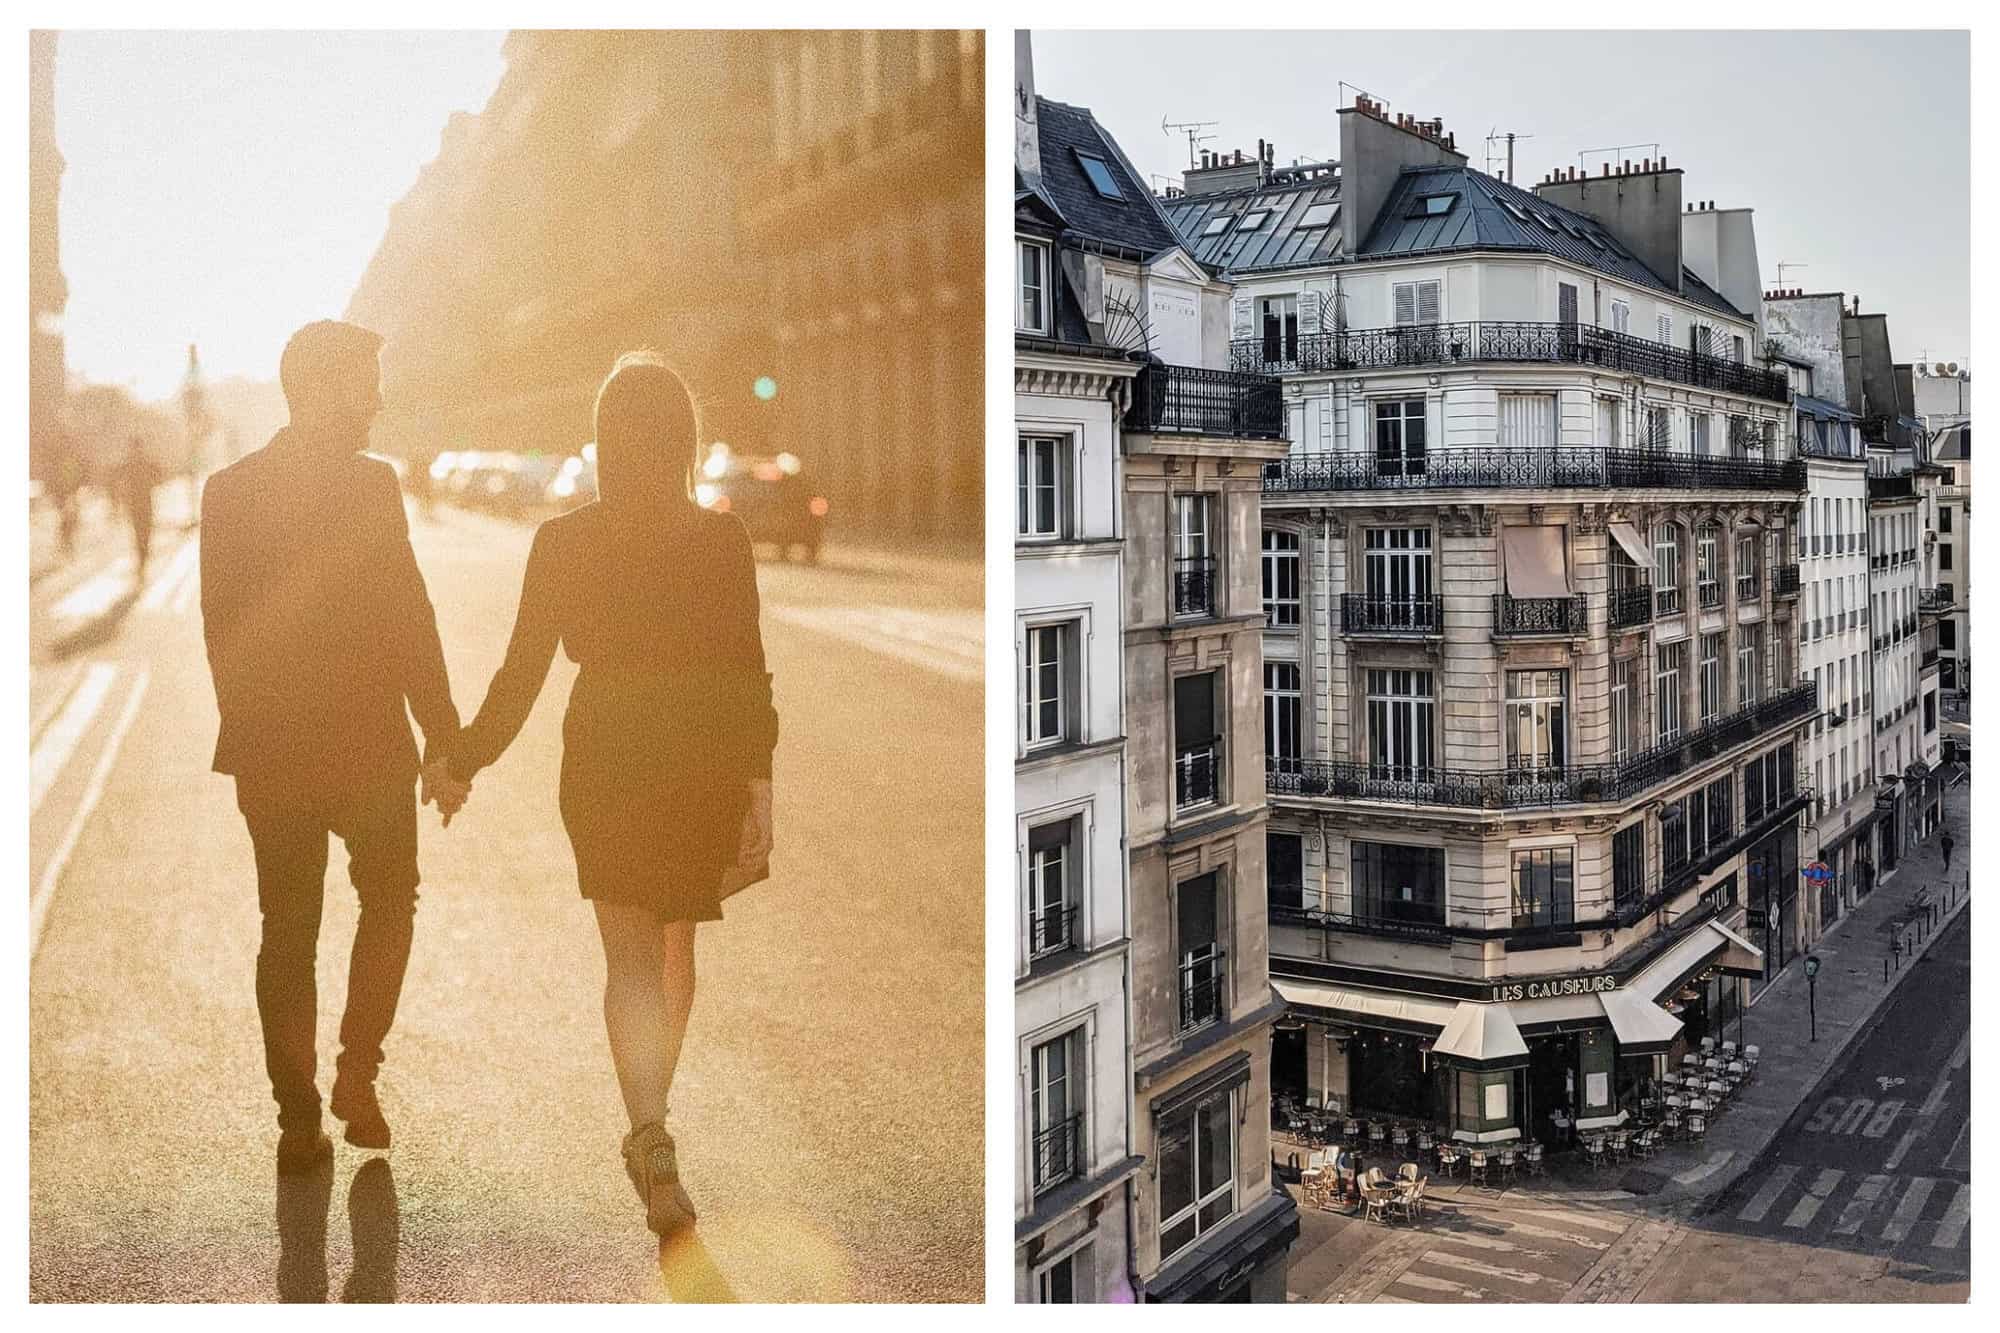 Left: A couple holds hands with their backs facing the camera as they walk down a street in Paris. The sun is setting in the background. Right: A Parisian building and street are pictured.